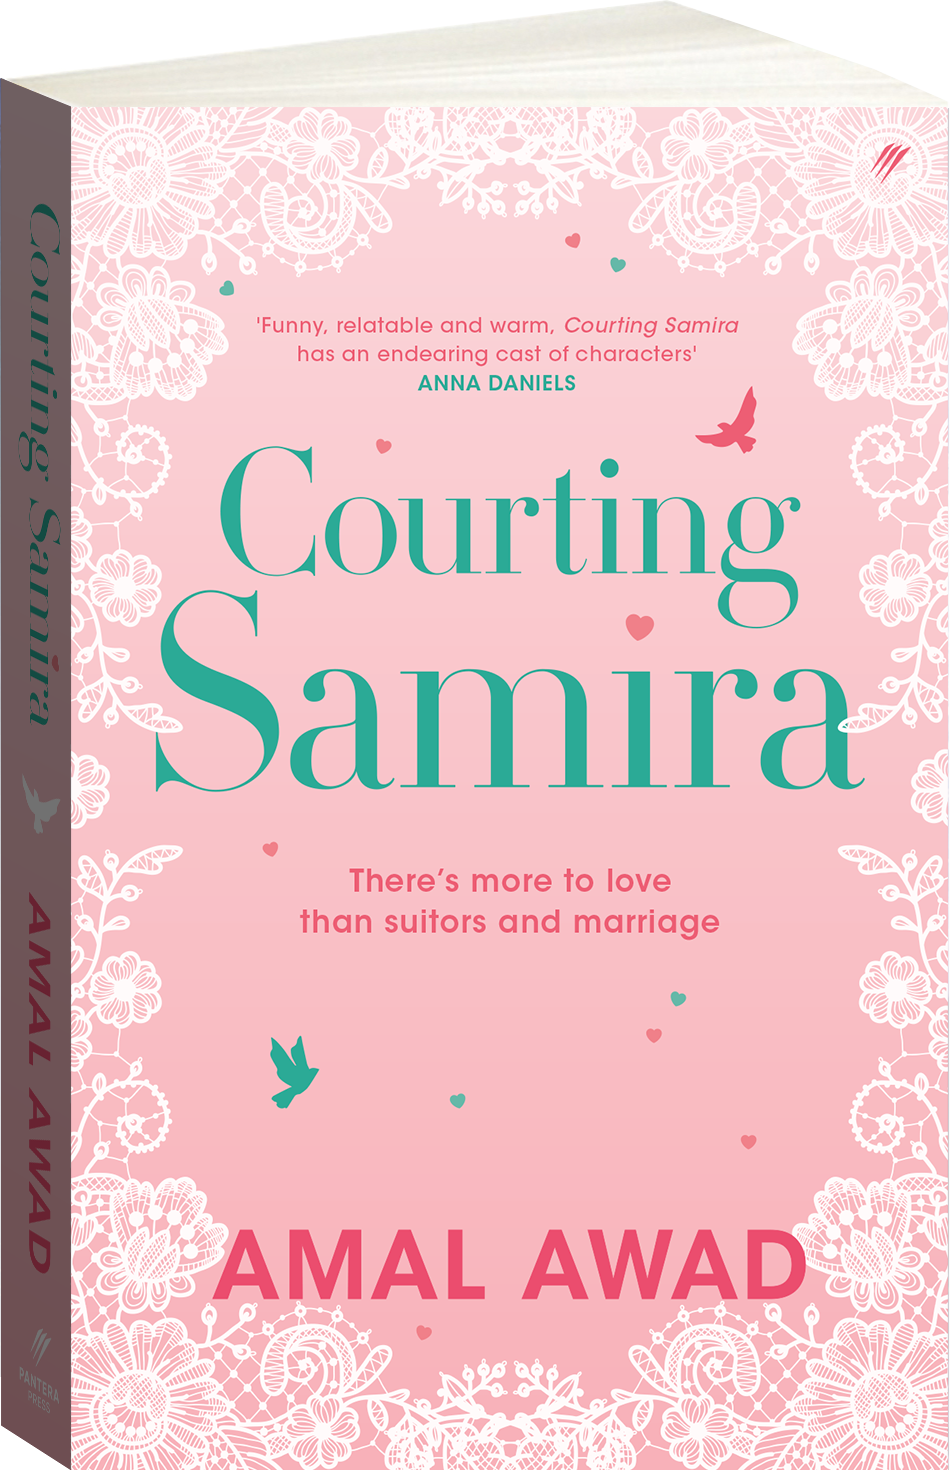 Courting Samira Cover Image